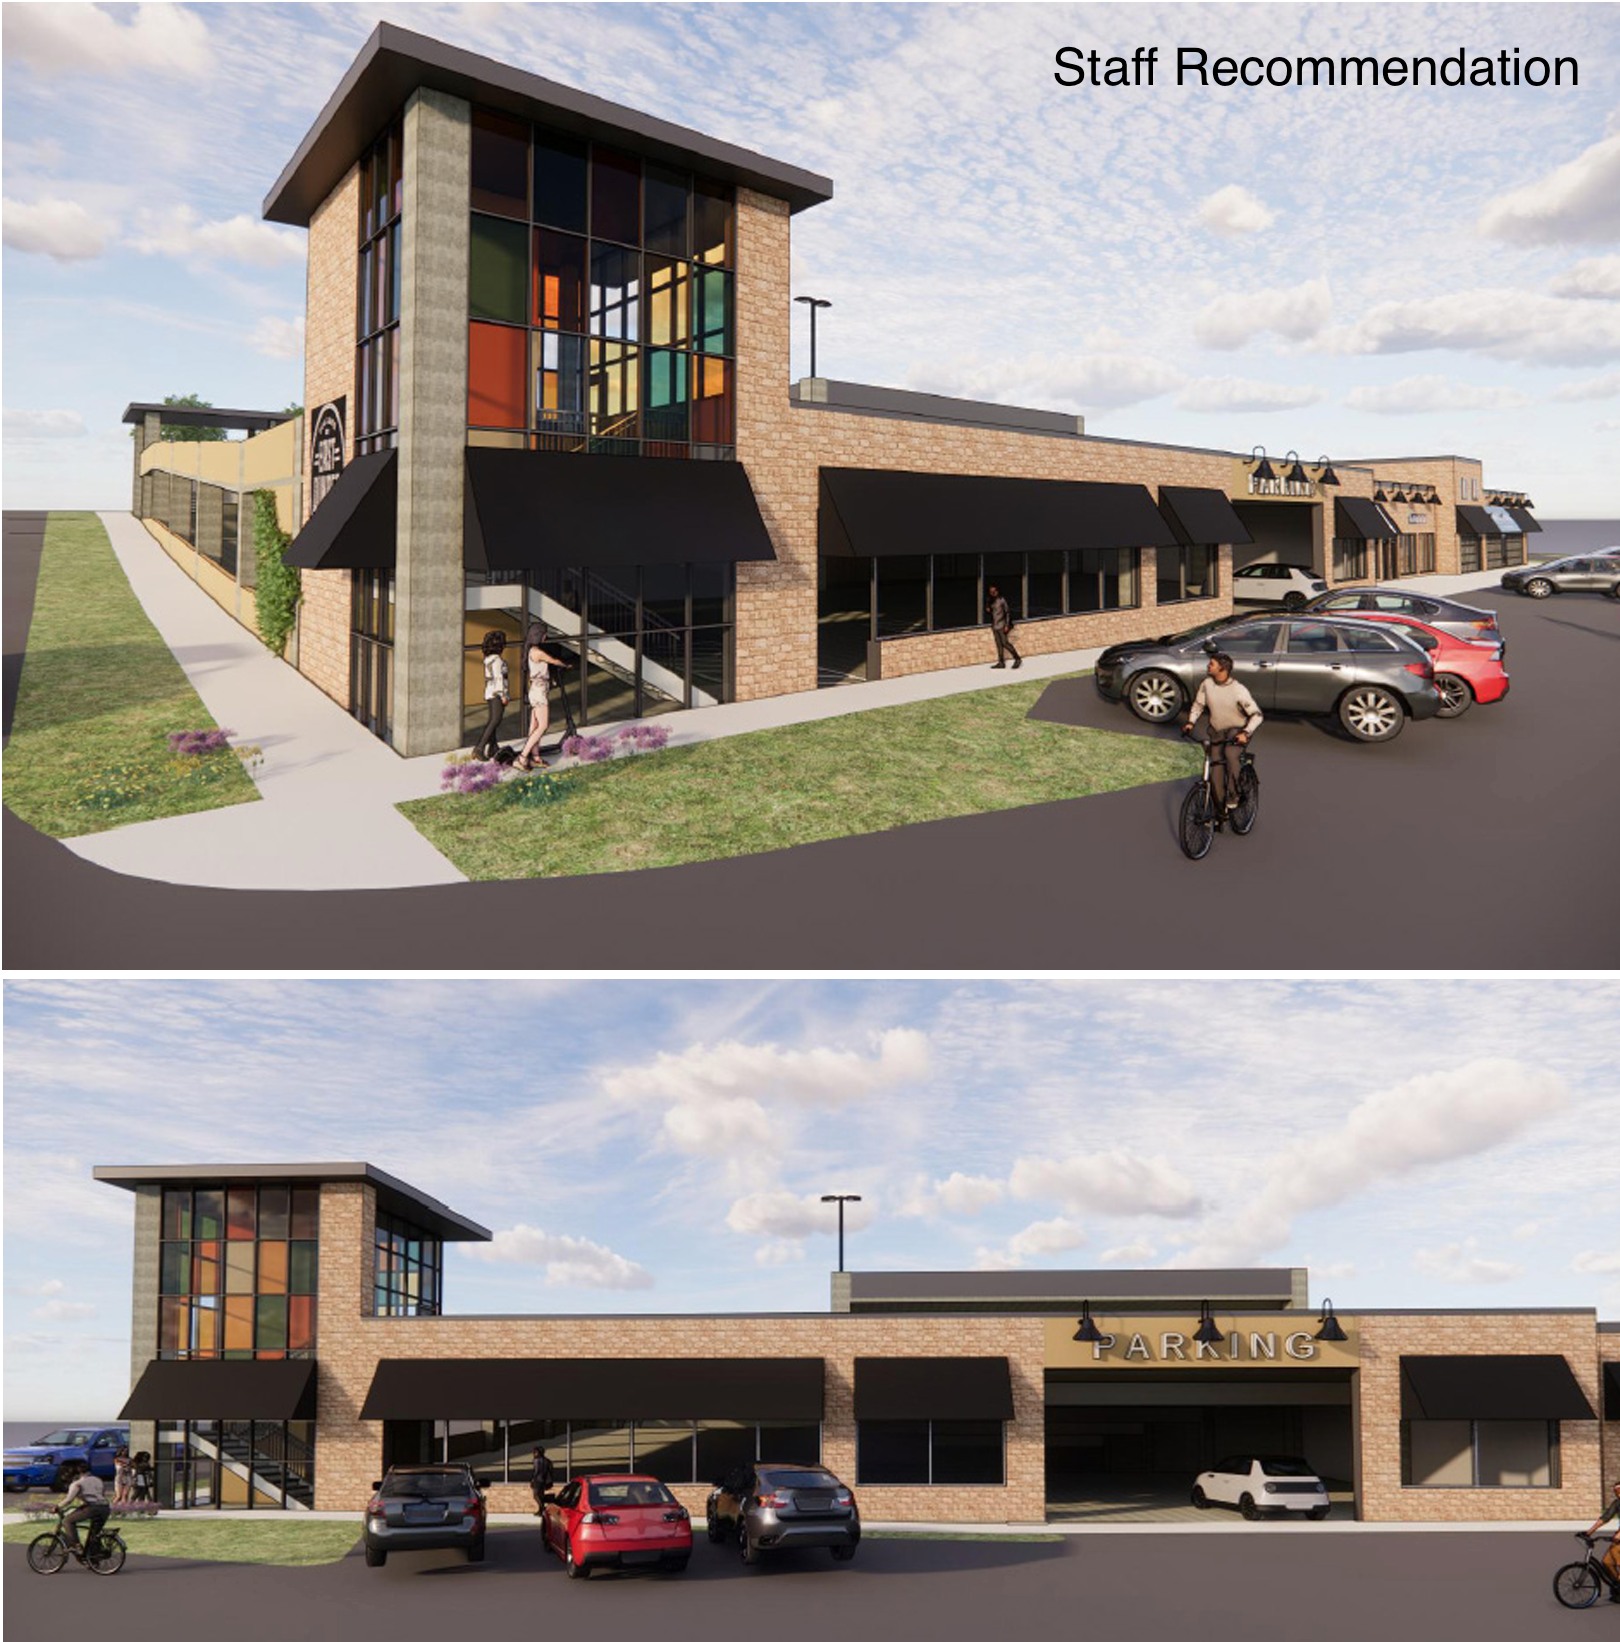 A rendering of the parking garage village staff are recommending for downtown East Dundee